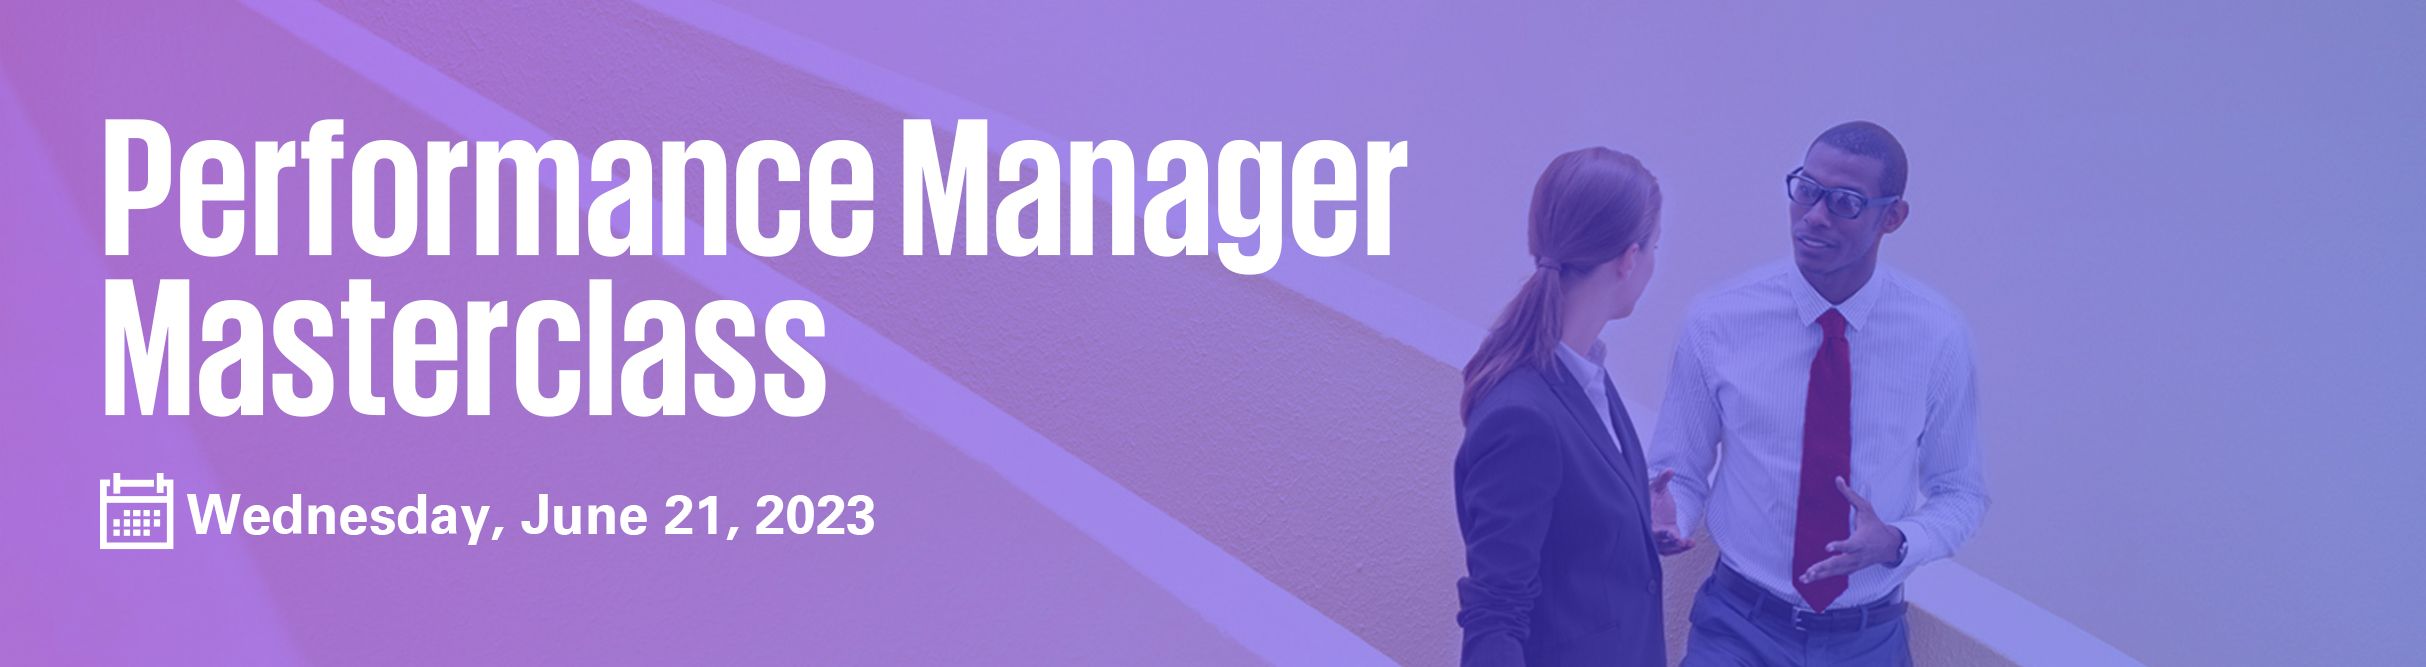 Performance Manager Masterclass